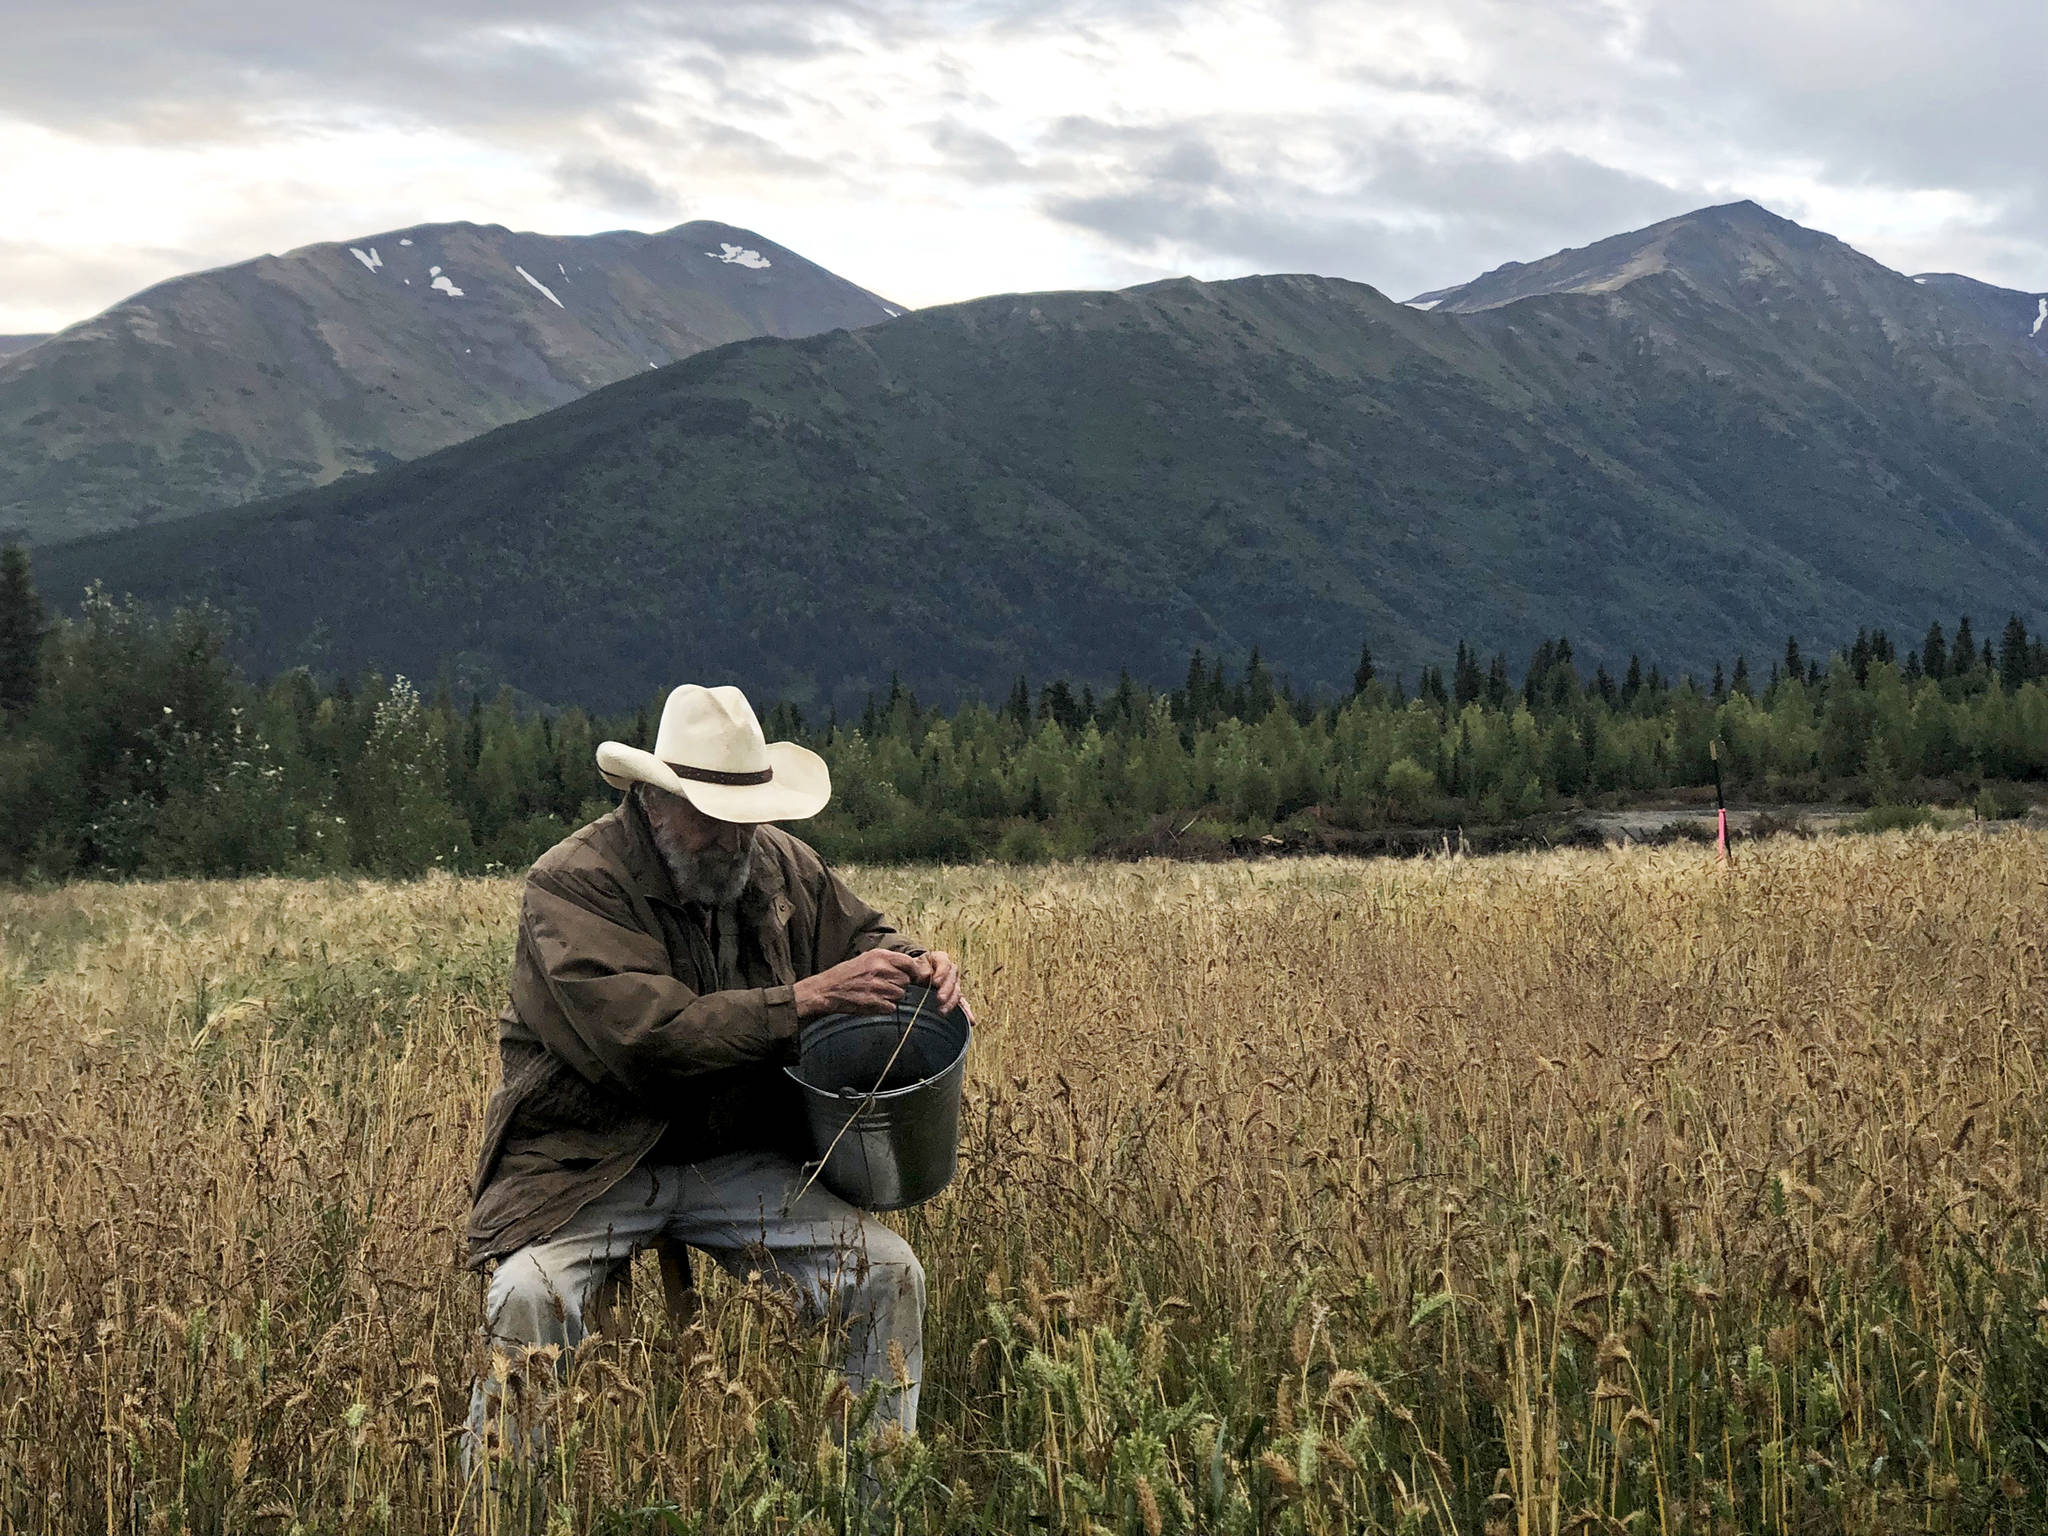 Robert Gibson of Cooper Landing picks barley by hand at a small barley field planted by the Kenai Peninsula Borough in a vacant gravel pit on Friday, Aug. 31, 2018, in Cooper Landing, Alaska. Gibson uses three different methods to pick the barley, including using a scythe and a hand sickle. (Photo by Victoria Petersen/Peninsula Clarion)